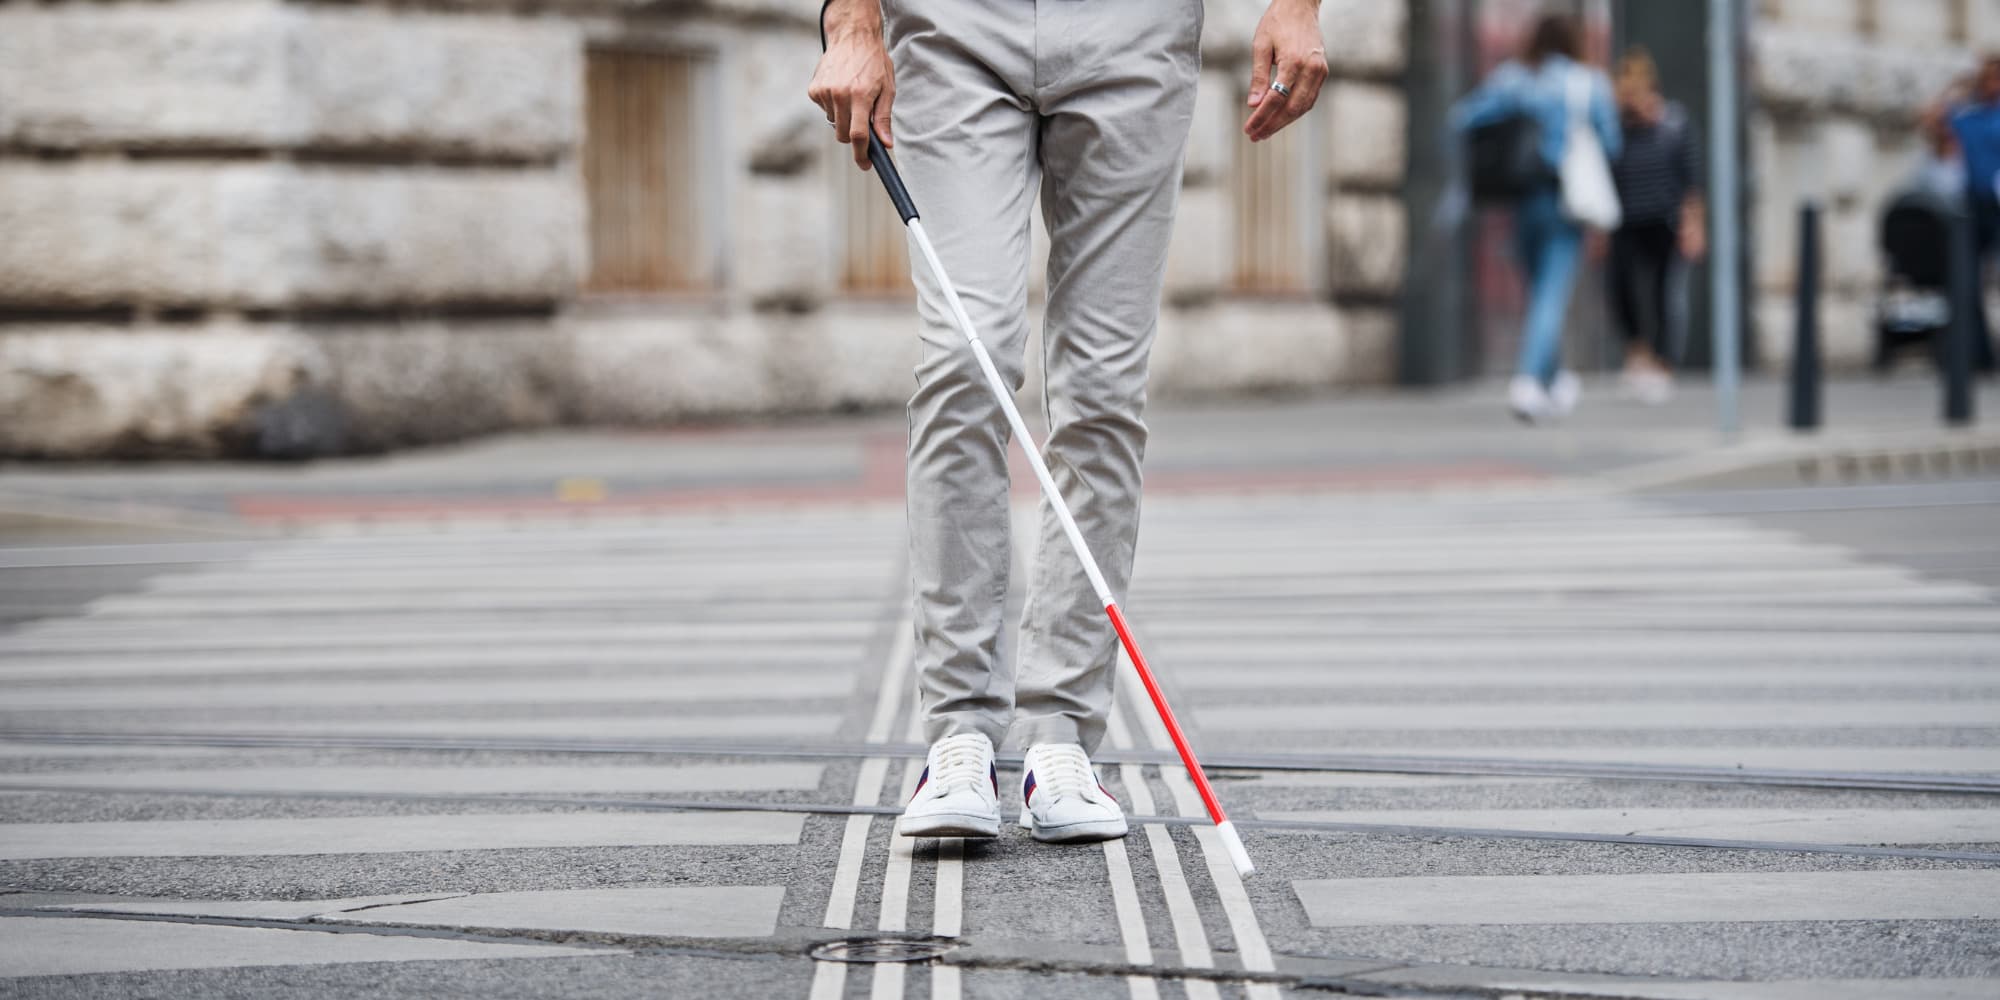 A shot from the waist down of a man navigating a city footpath with a white cane.